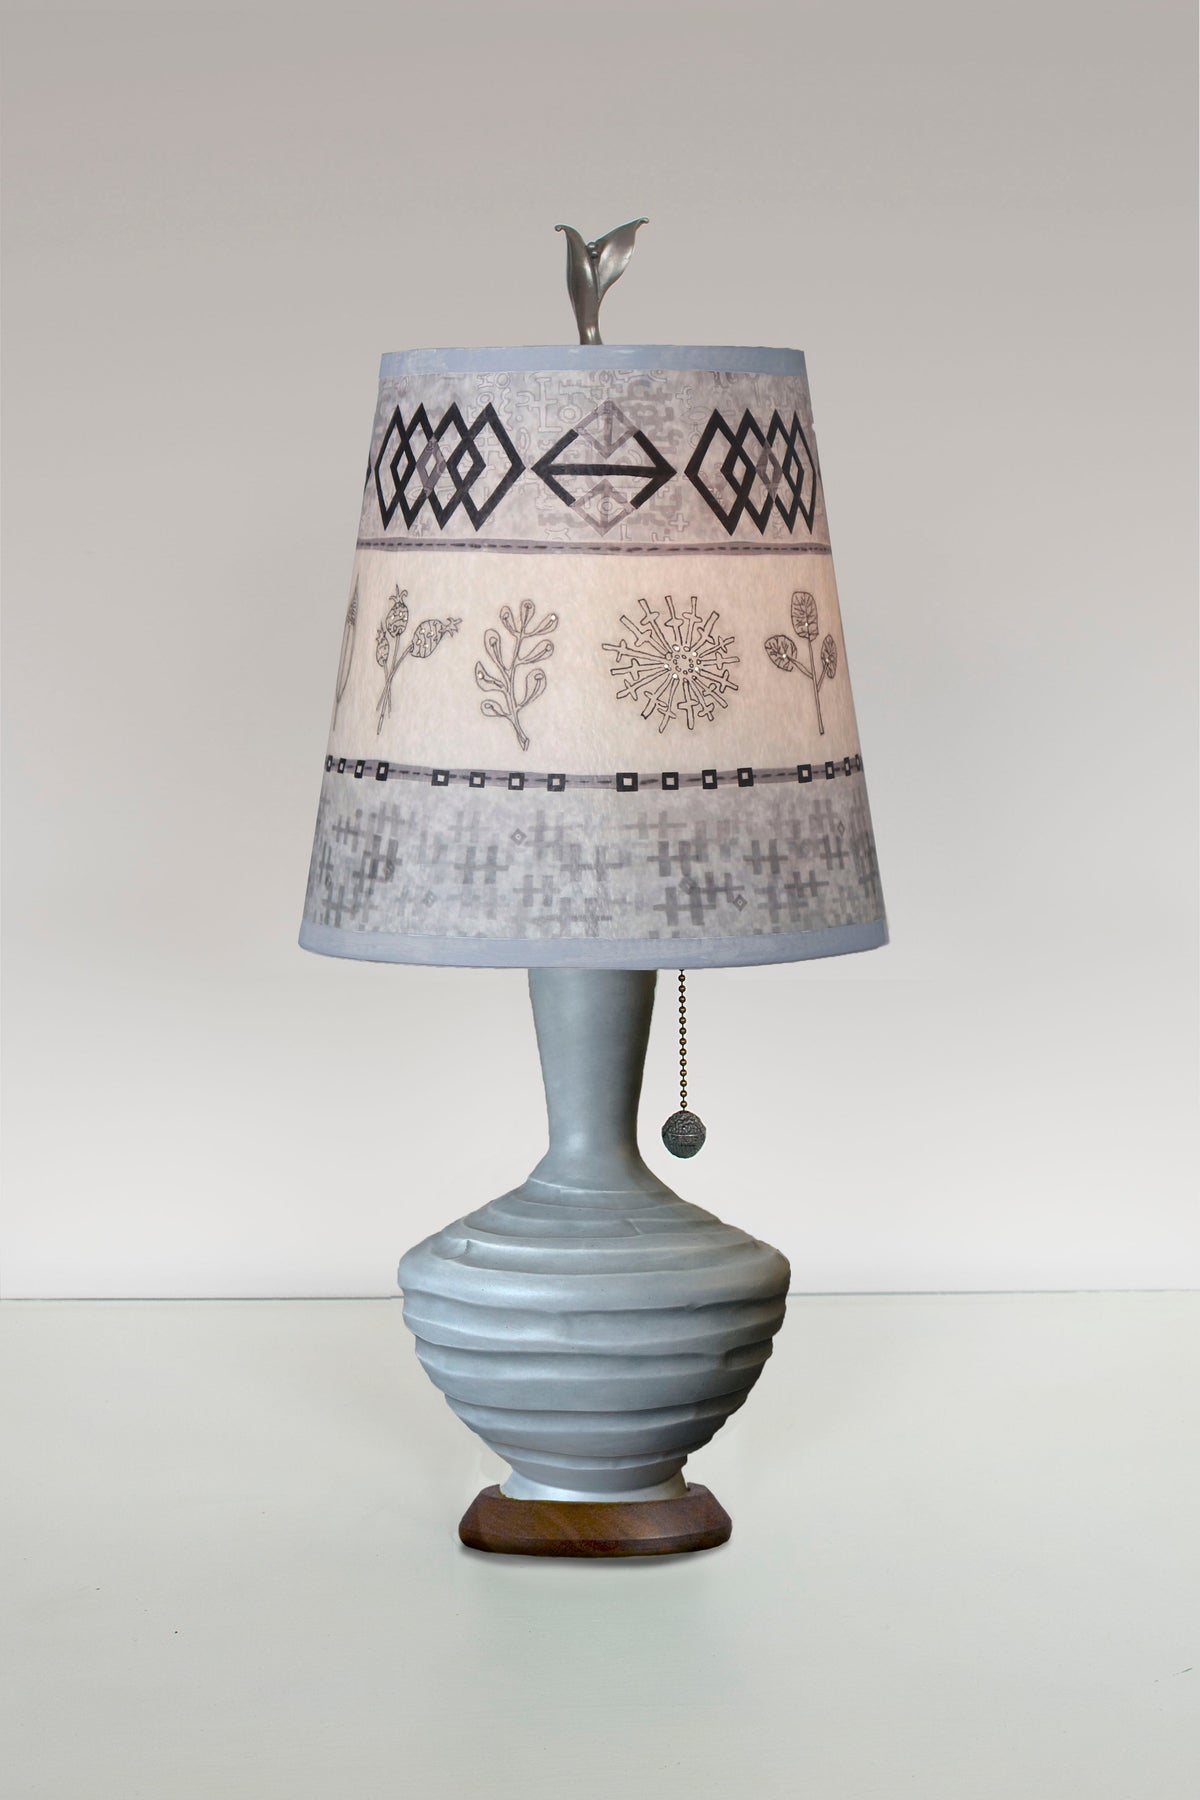 Janna Ugone &amp; Co Table Lamps Ceramic Table Lamp with Small Drum Shade in Woven &amp; Sprig in Mist